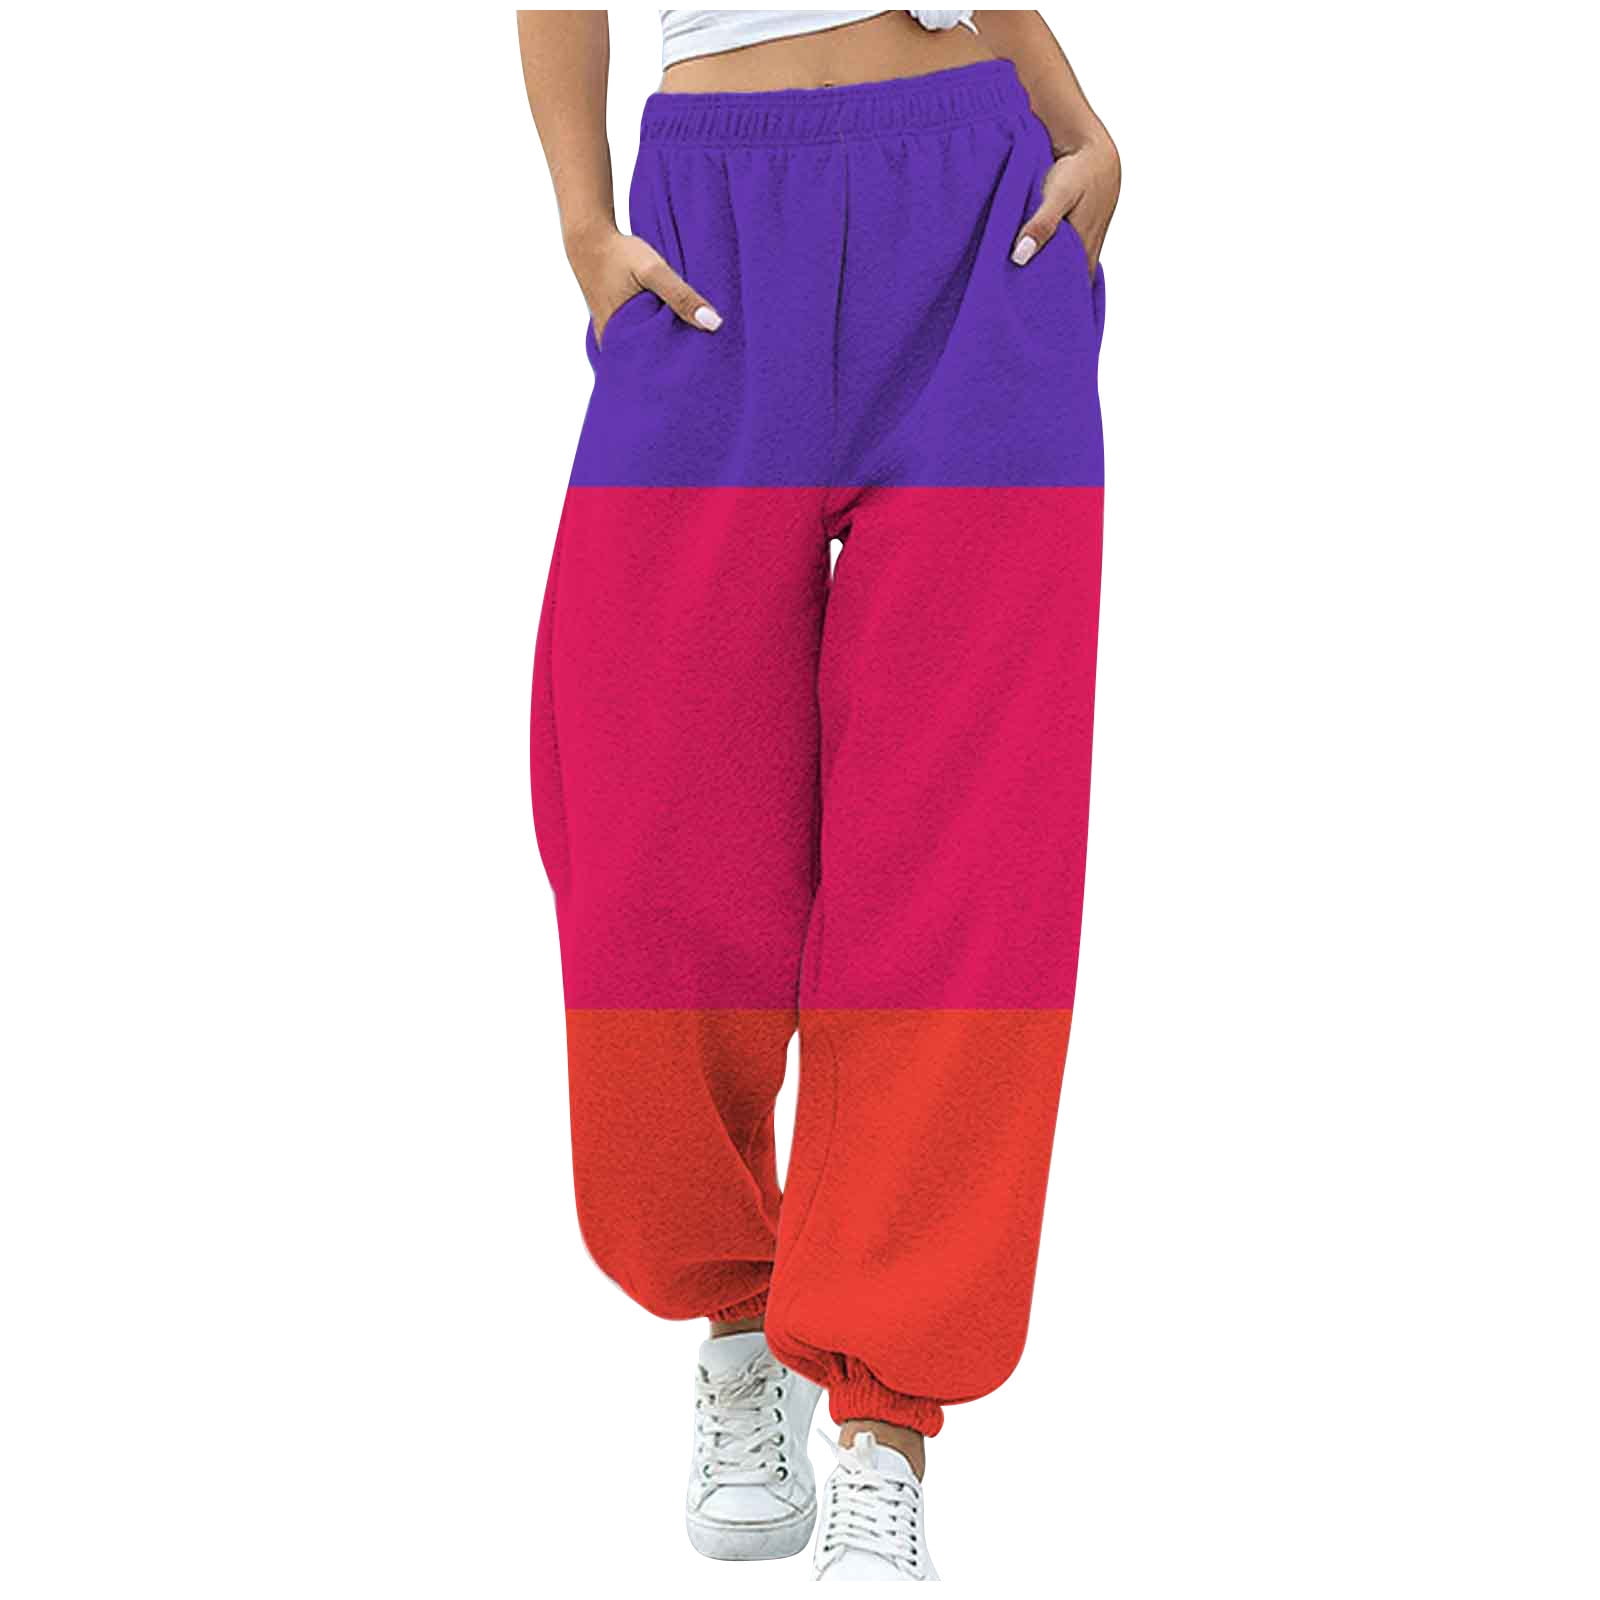 JGTDBPO Baggy Sweatpants For Women Casual High Waist Jogger Pants Y2K  Trendy Lounge Trousers With Pockets Sporty Gym Athletic Fit Jogger Pants 